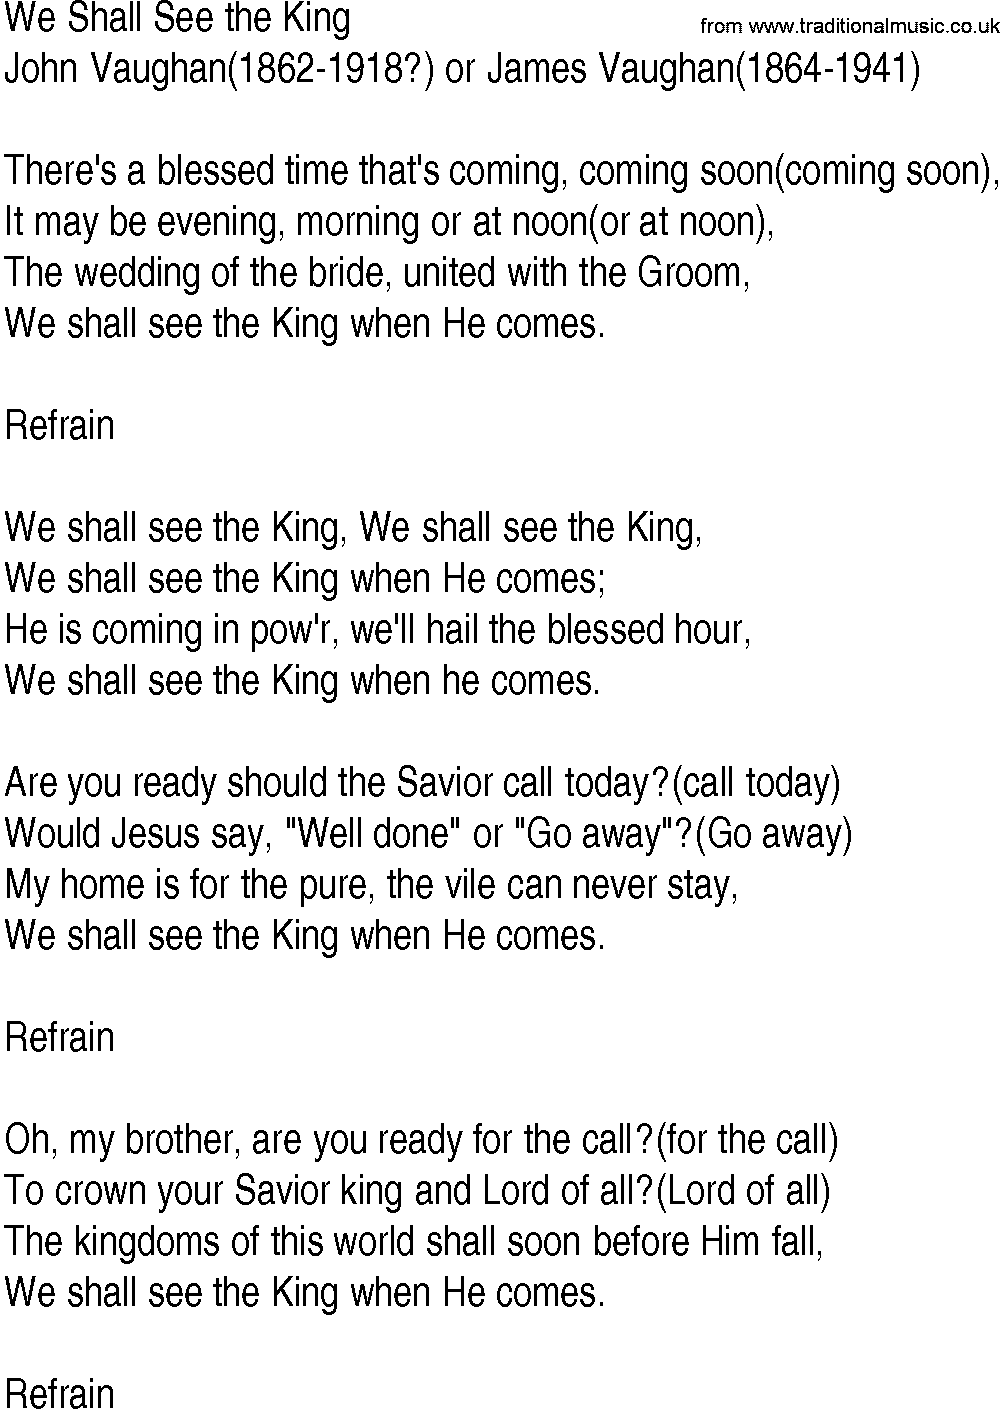 Hymn and Gospel Song: We Shall See the King by John Vaughan or James Vaughan lyrics